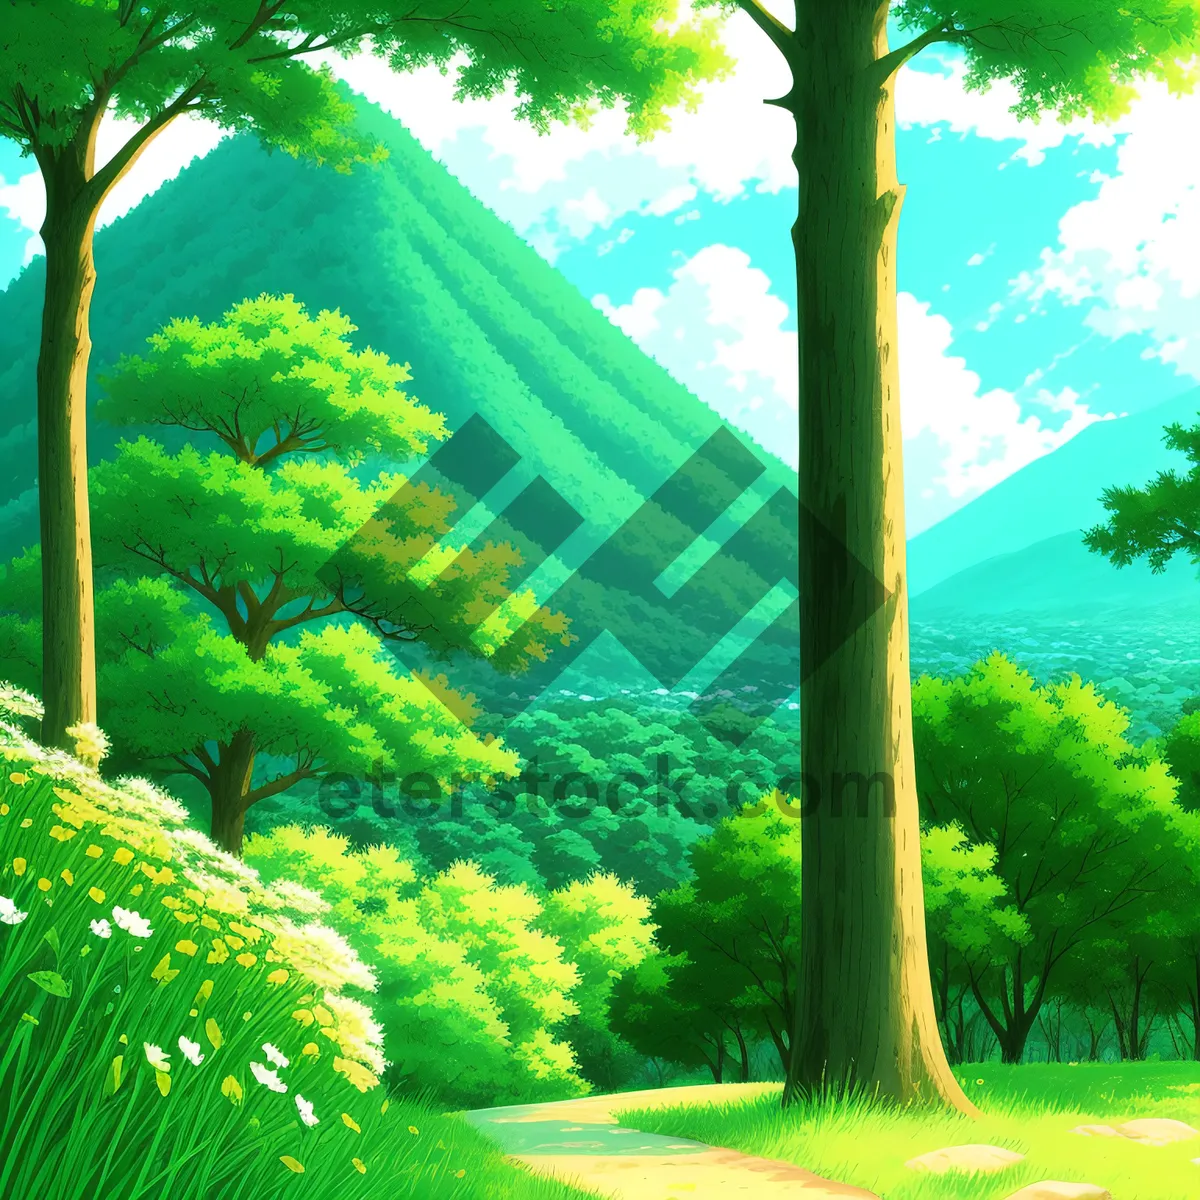 Picture of Vibrant Summer Forest with Lush Foliage